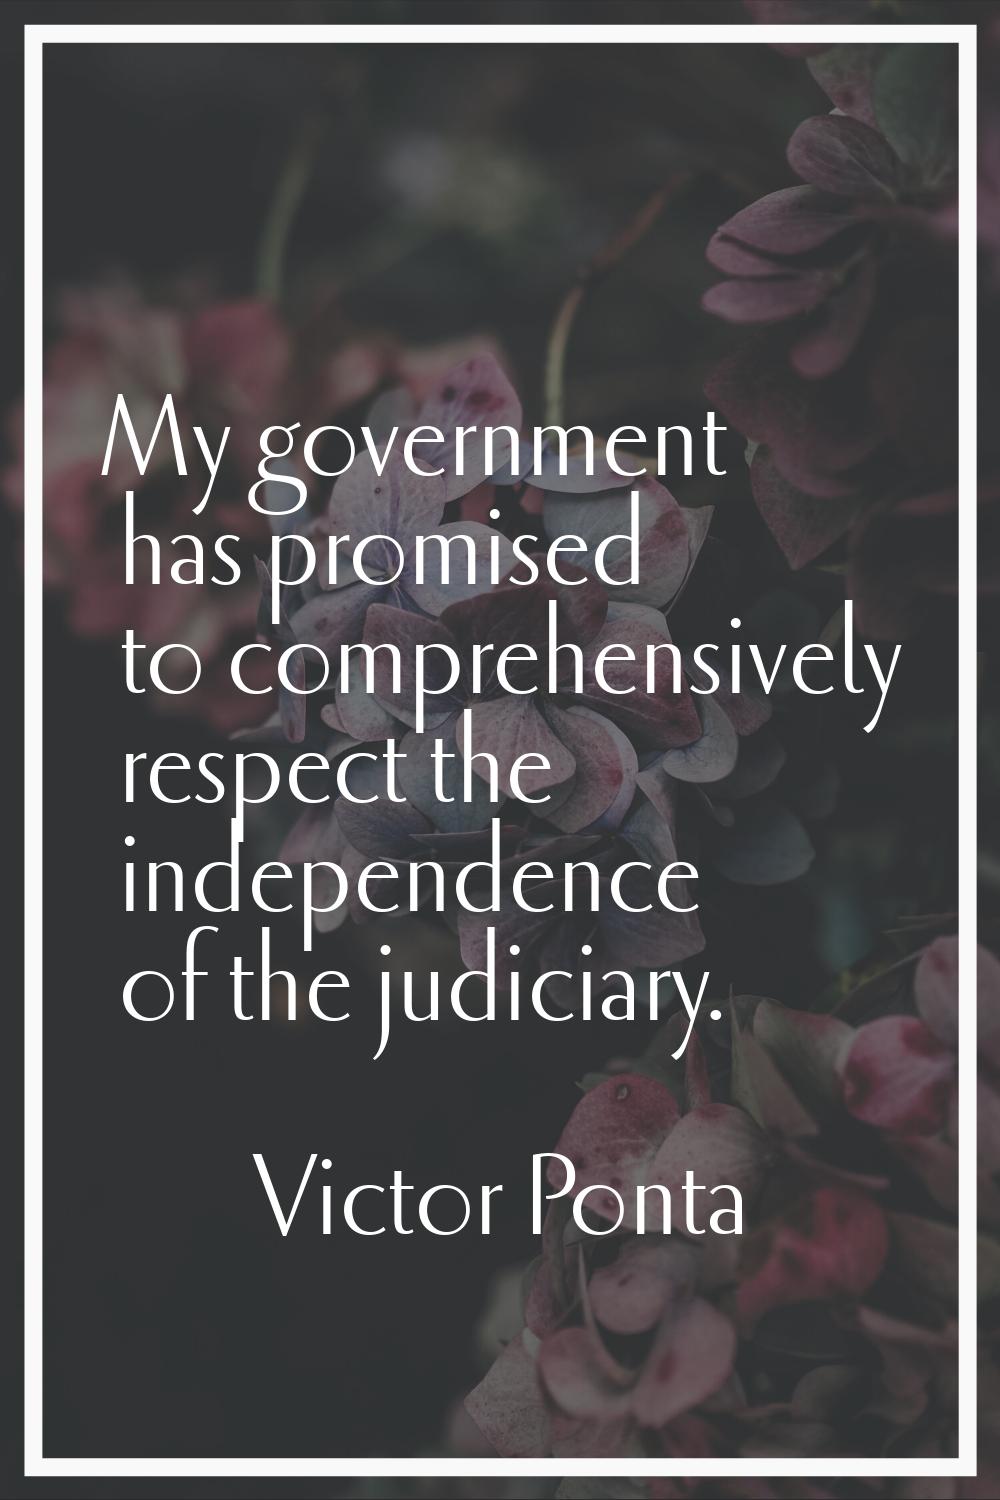 My government has promised to comprehensively respect the independence of the judiciary.